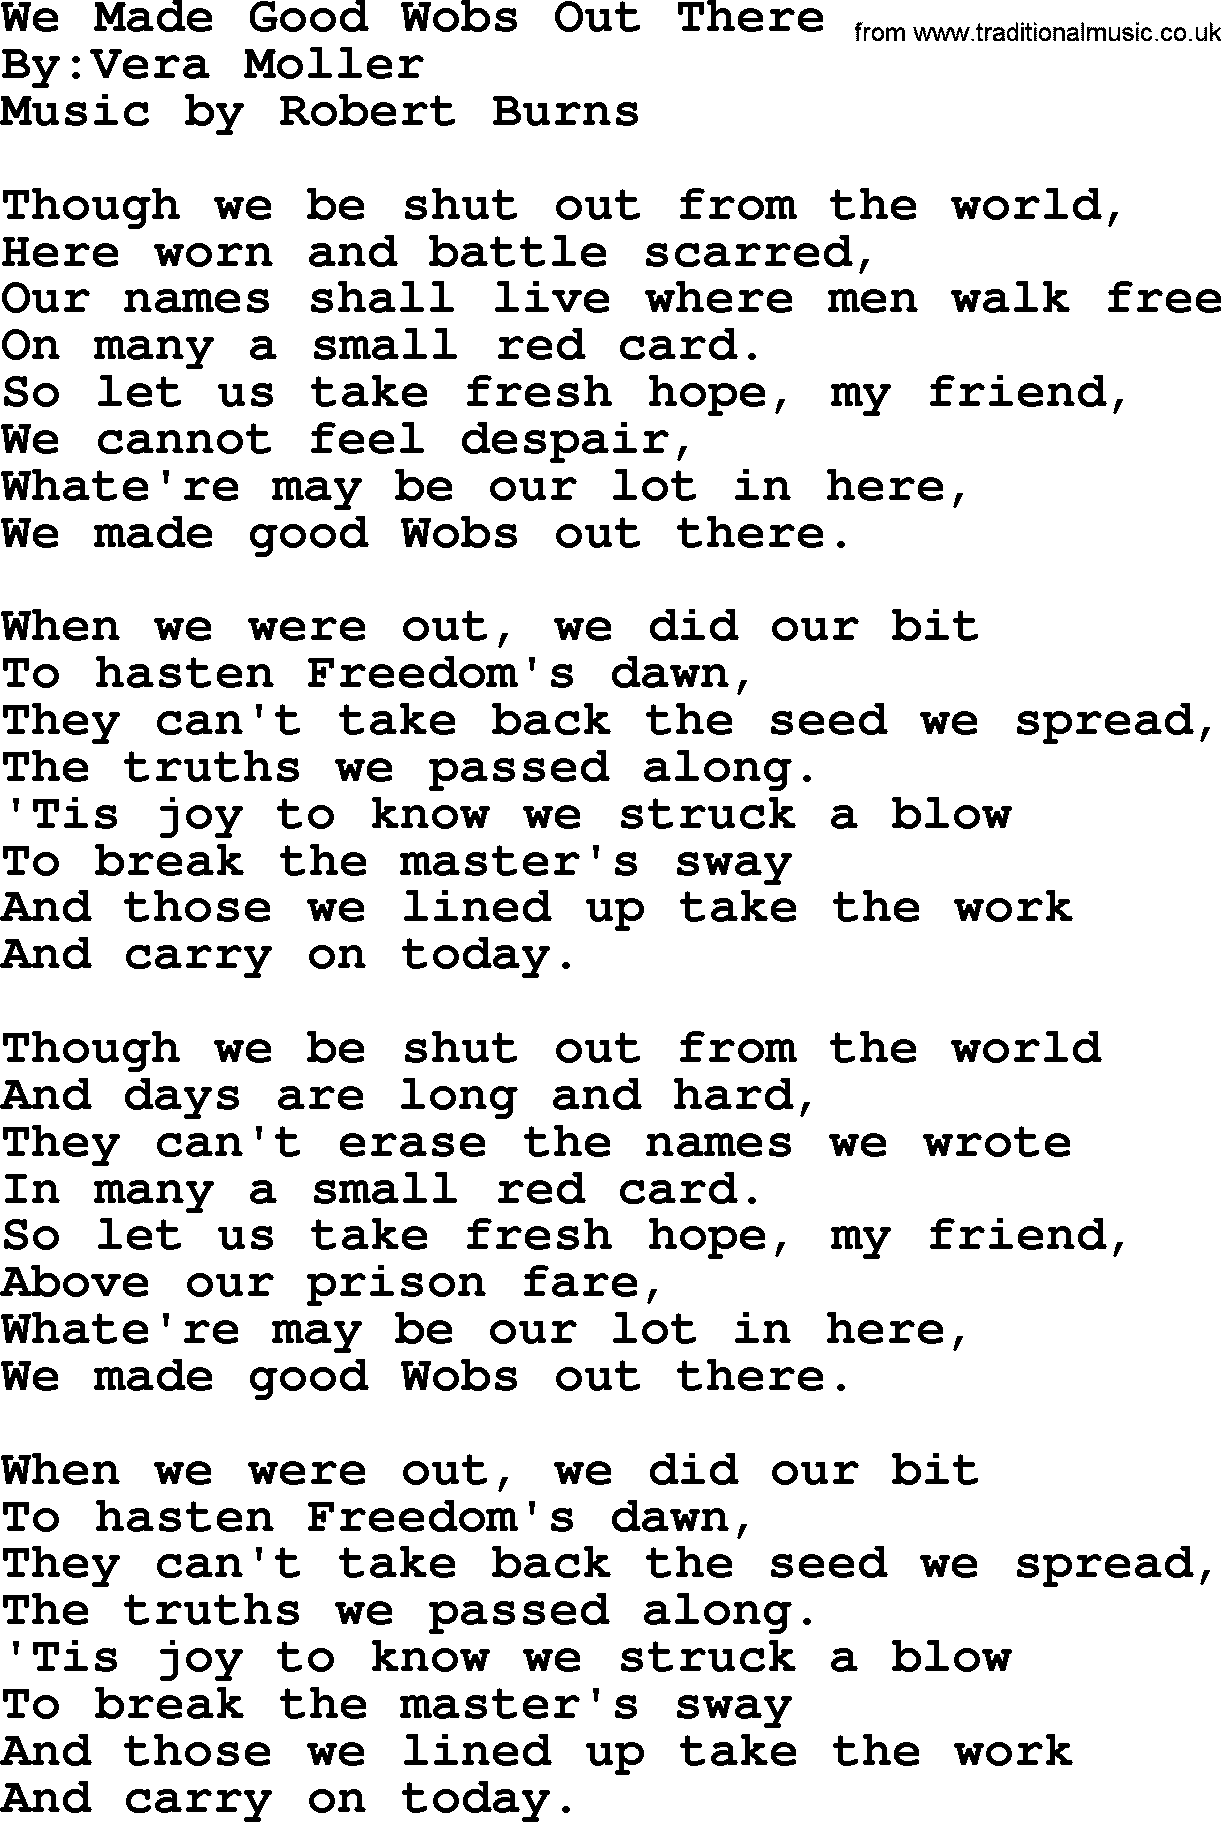 Political, Solidarity, Workers or Union song: We Made Good Wobs Out There, lyrics